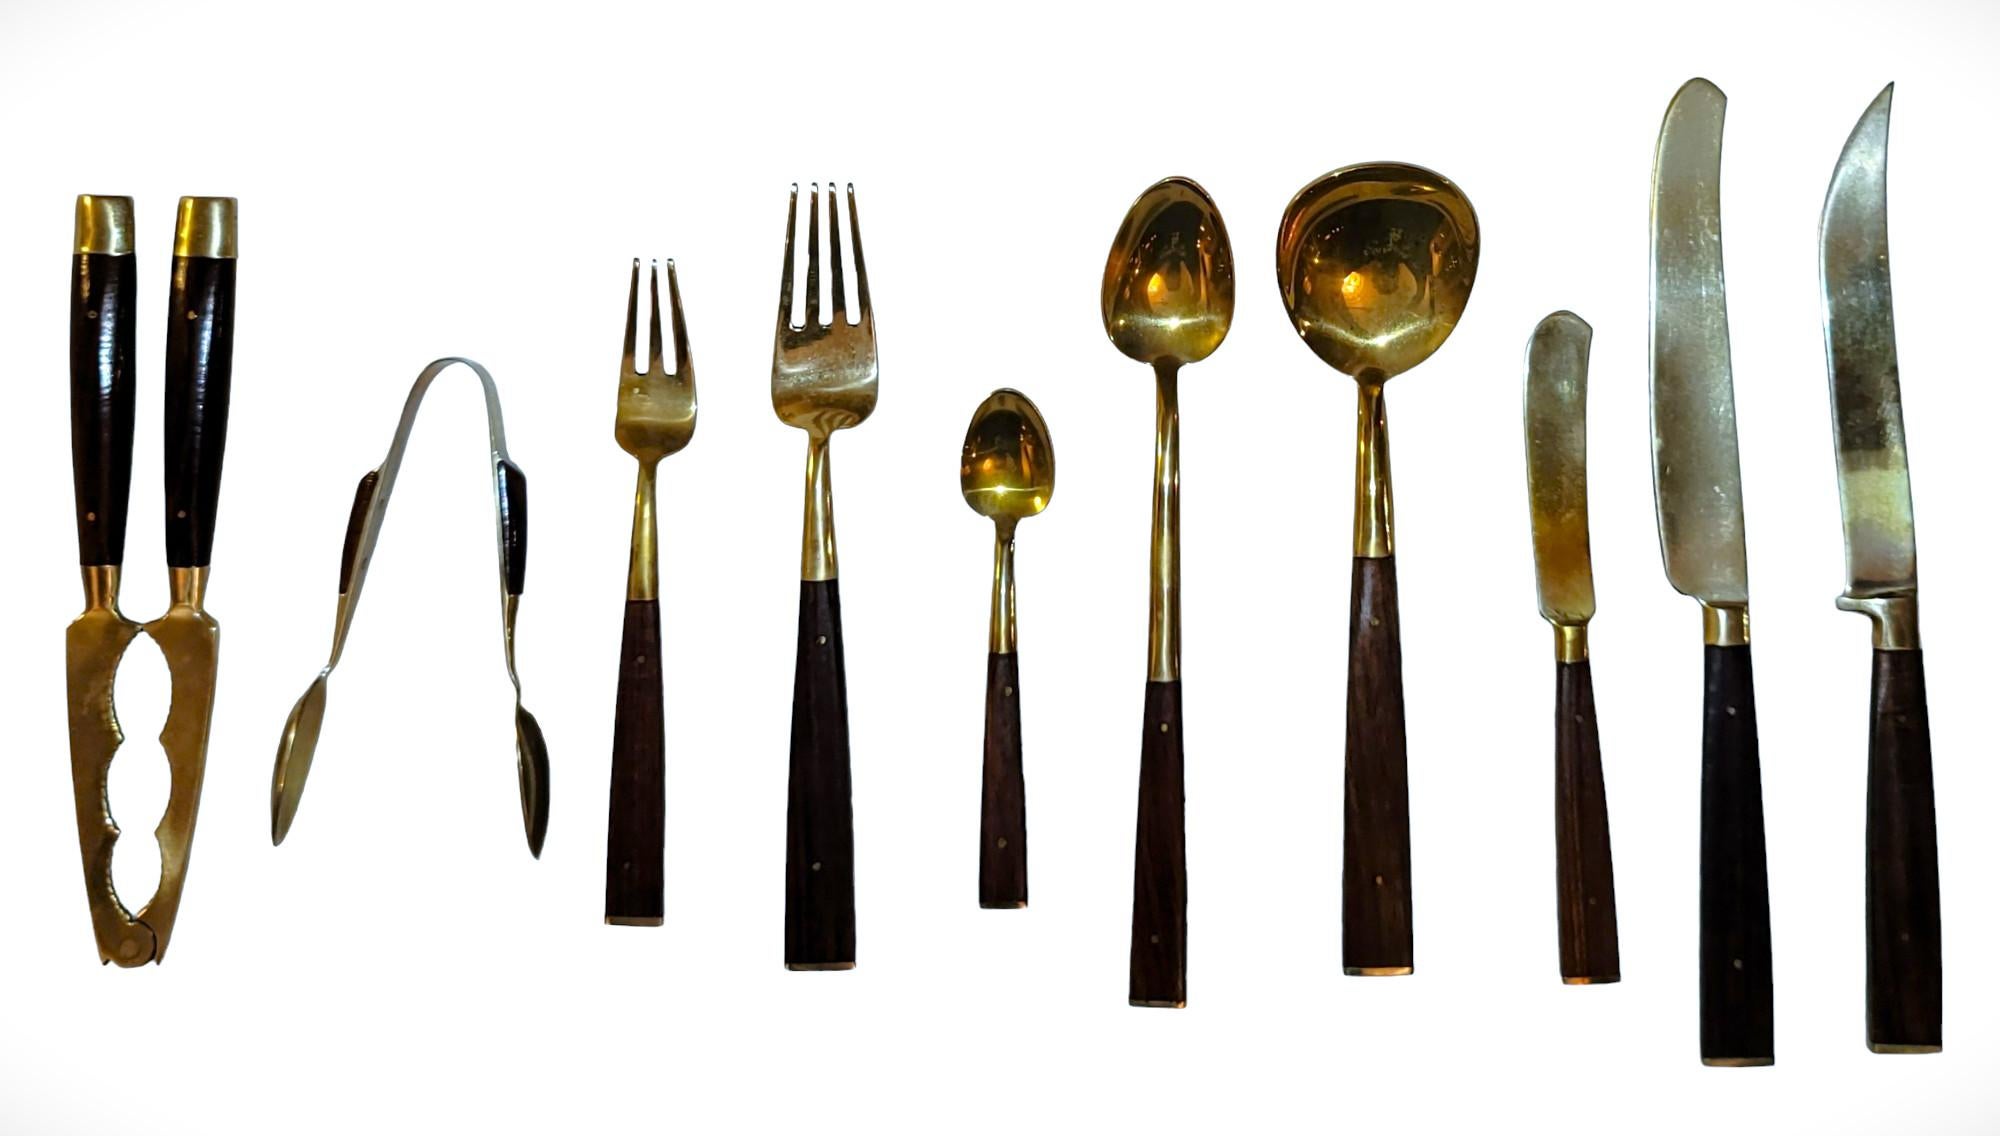 1960s 146 pcs flatware set in great condition. This flatware set has everything you need to serve 12 people in style. This 12-person set comes with the original box and all compartments ready to use!